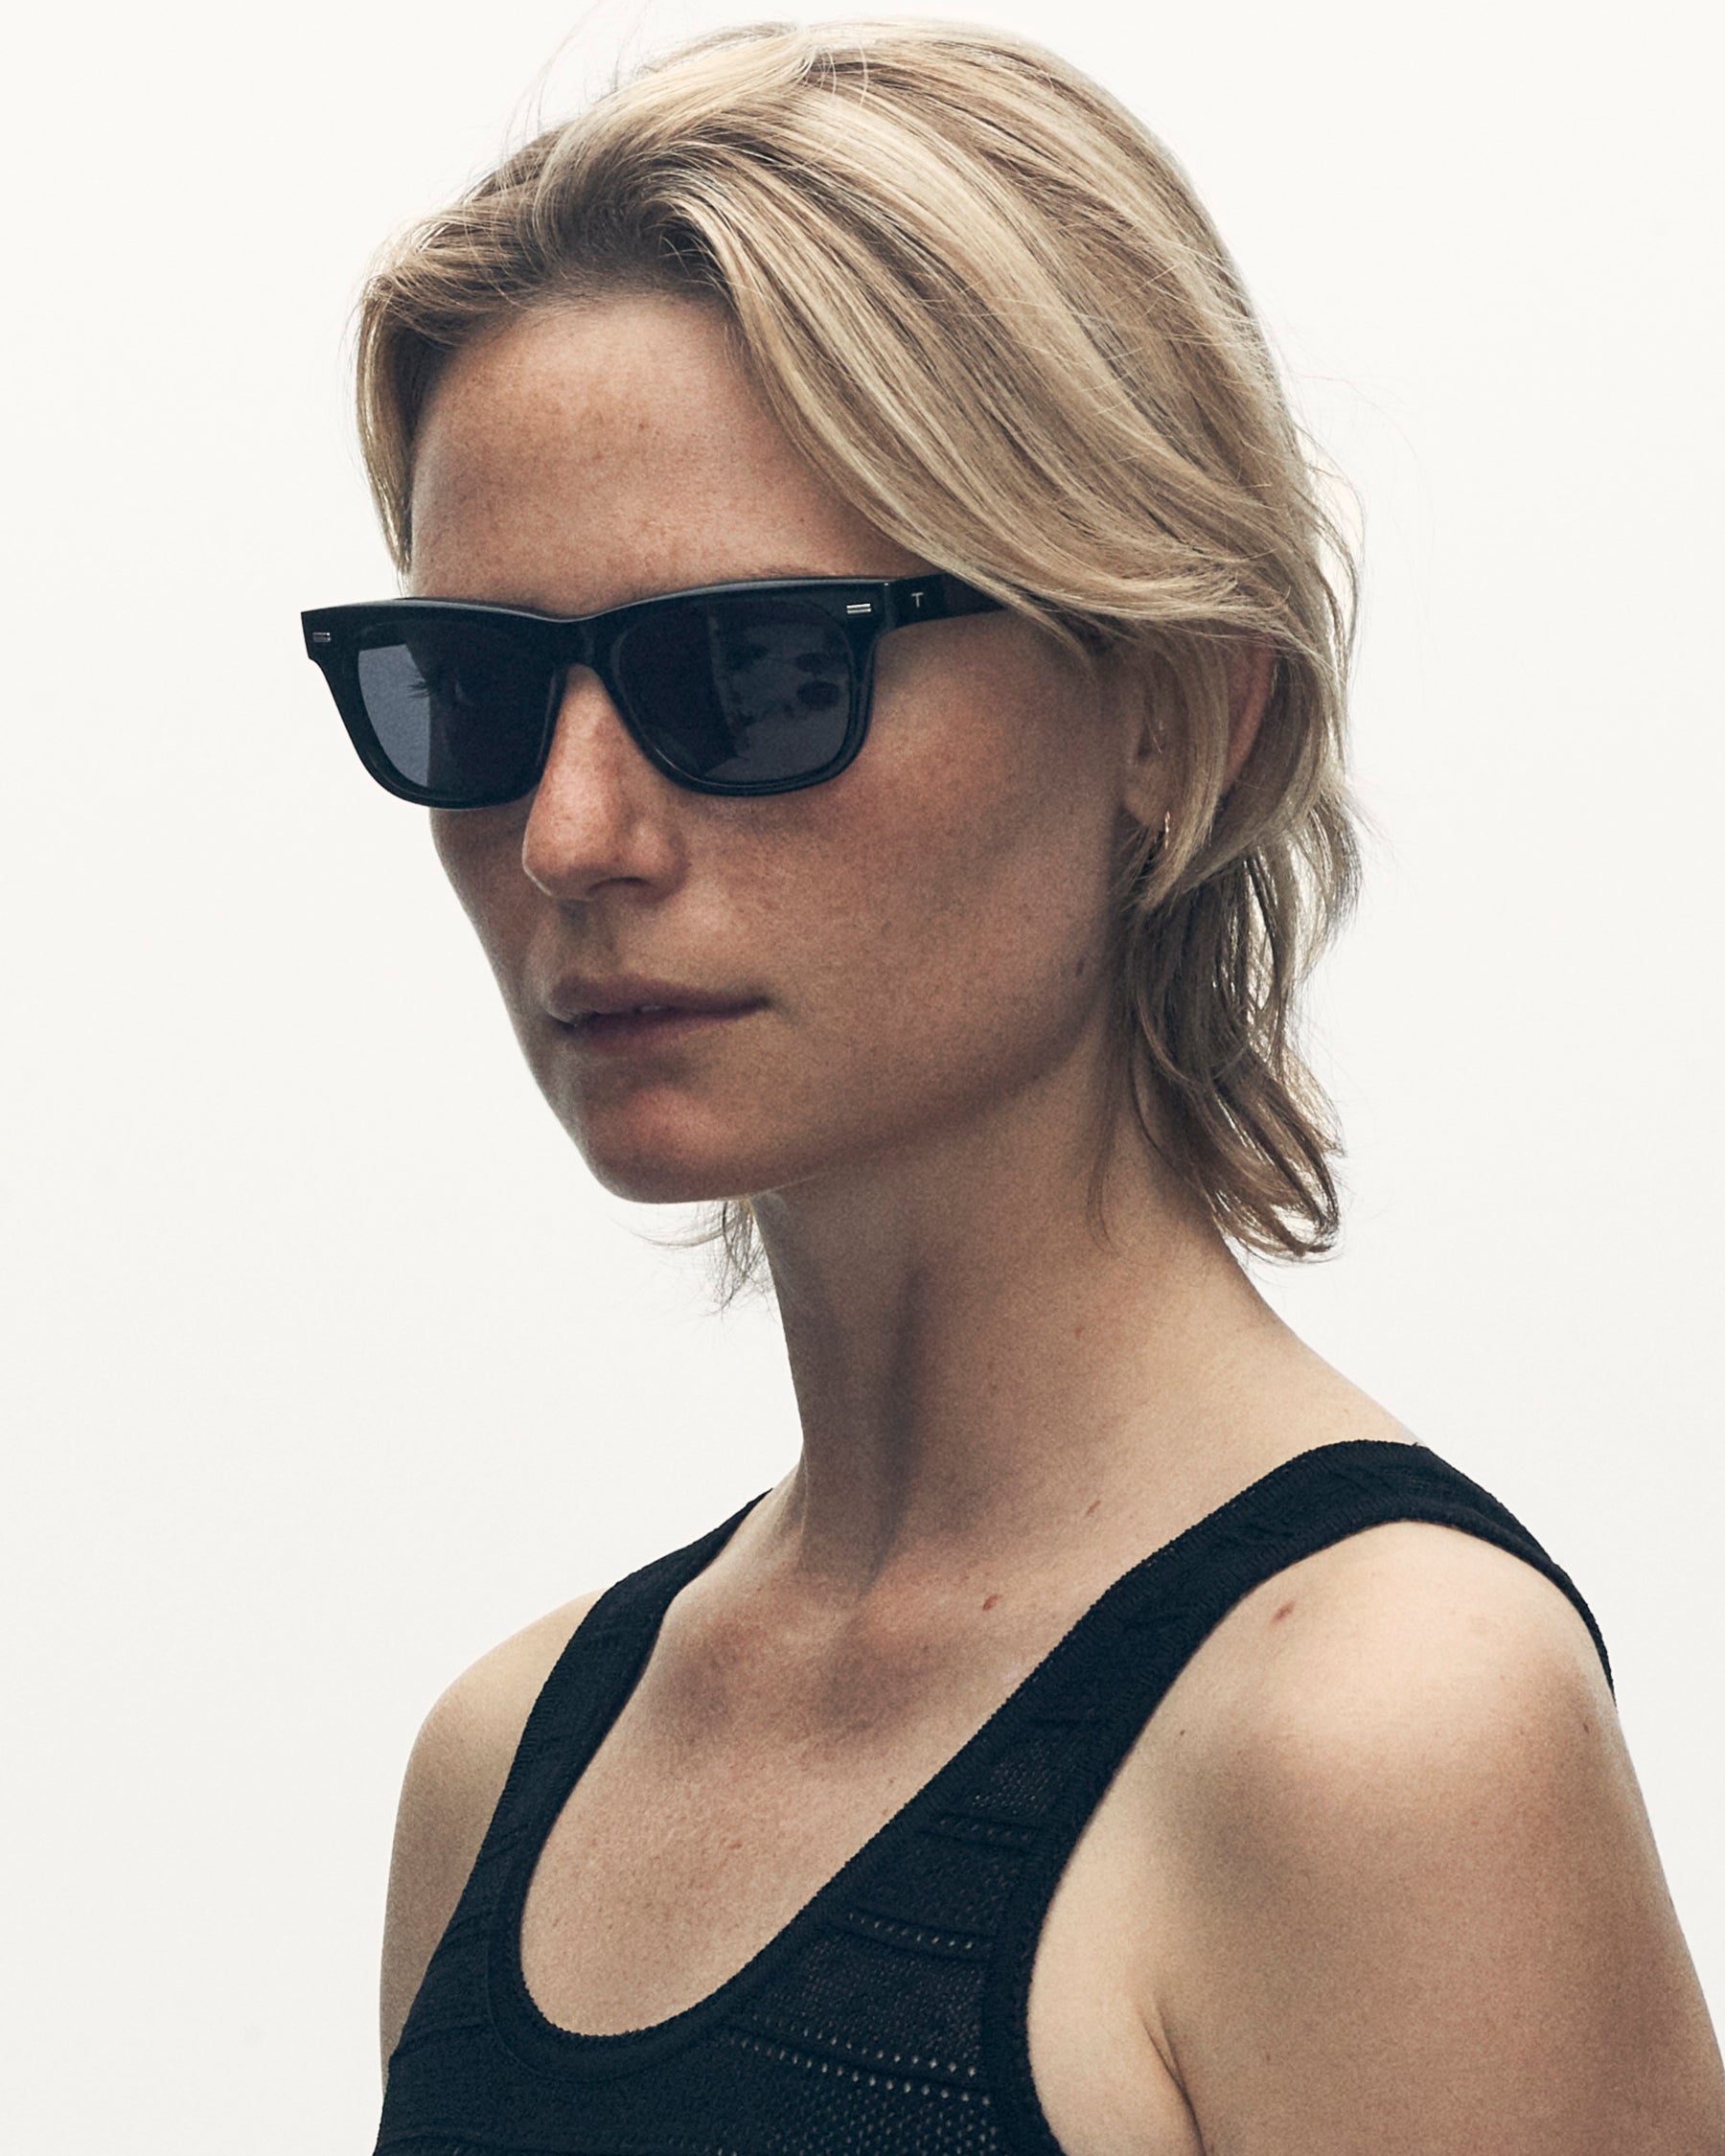 model wearing sunglasses. she is looking just beyond the camera.